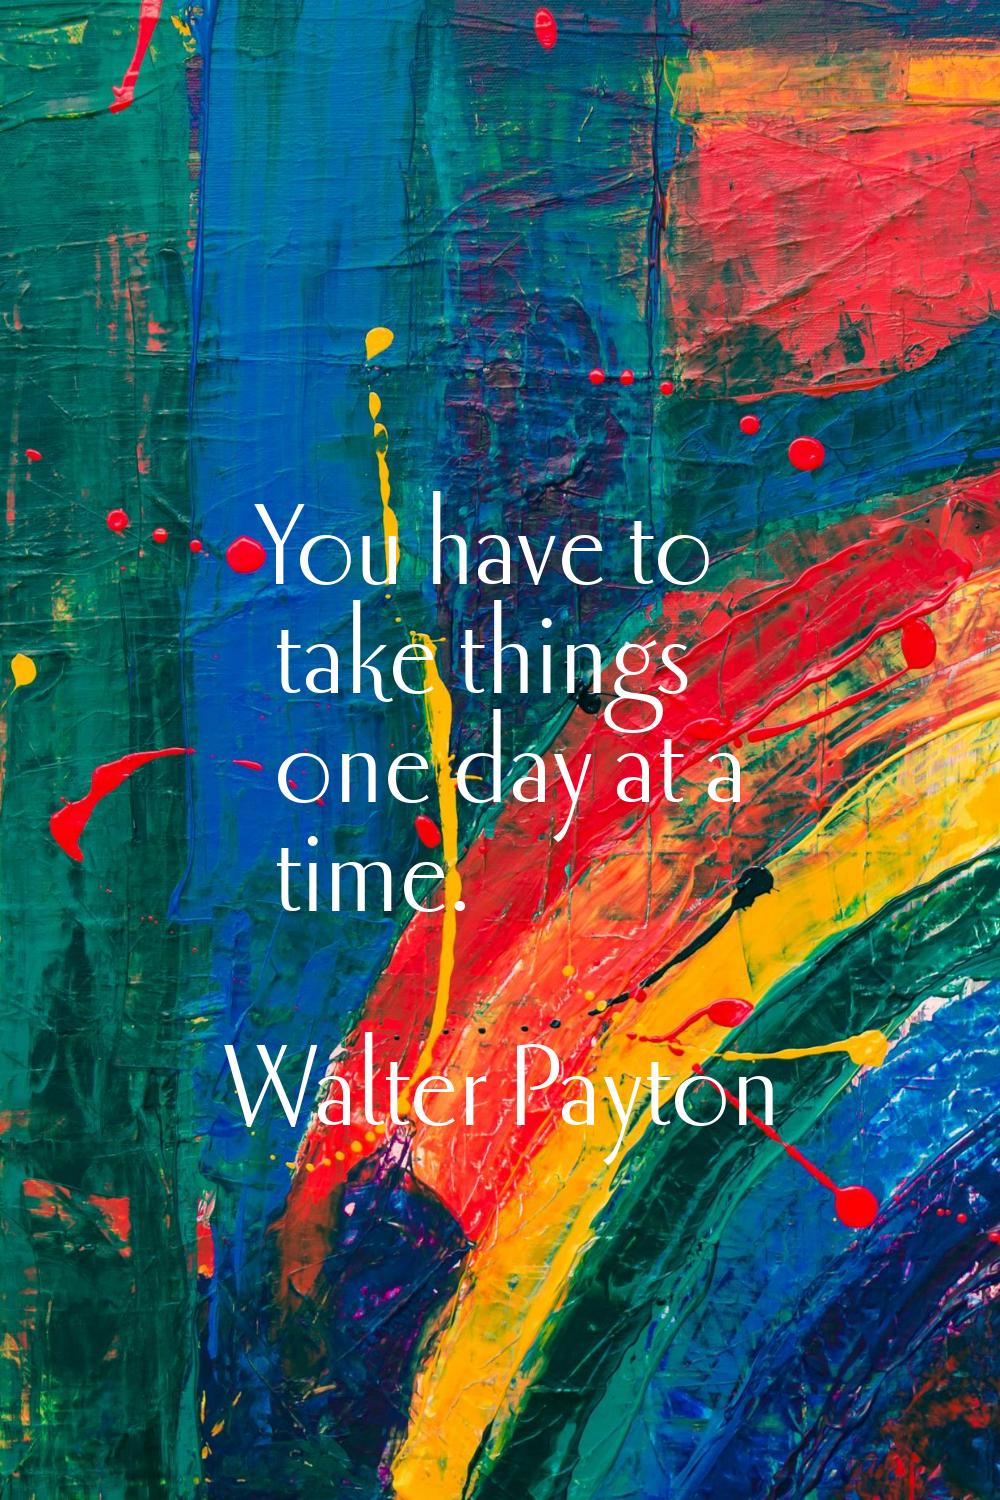 You have to take things one day at a time.